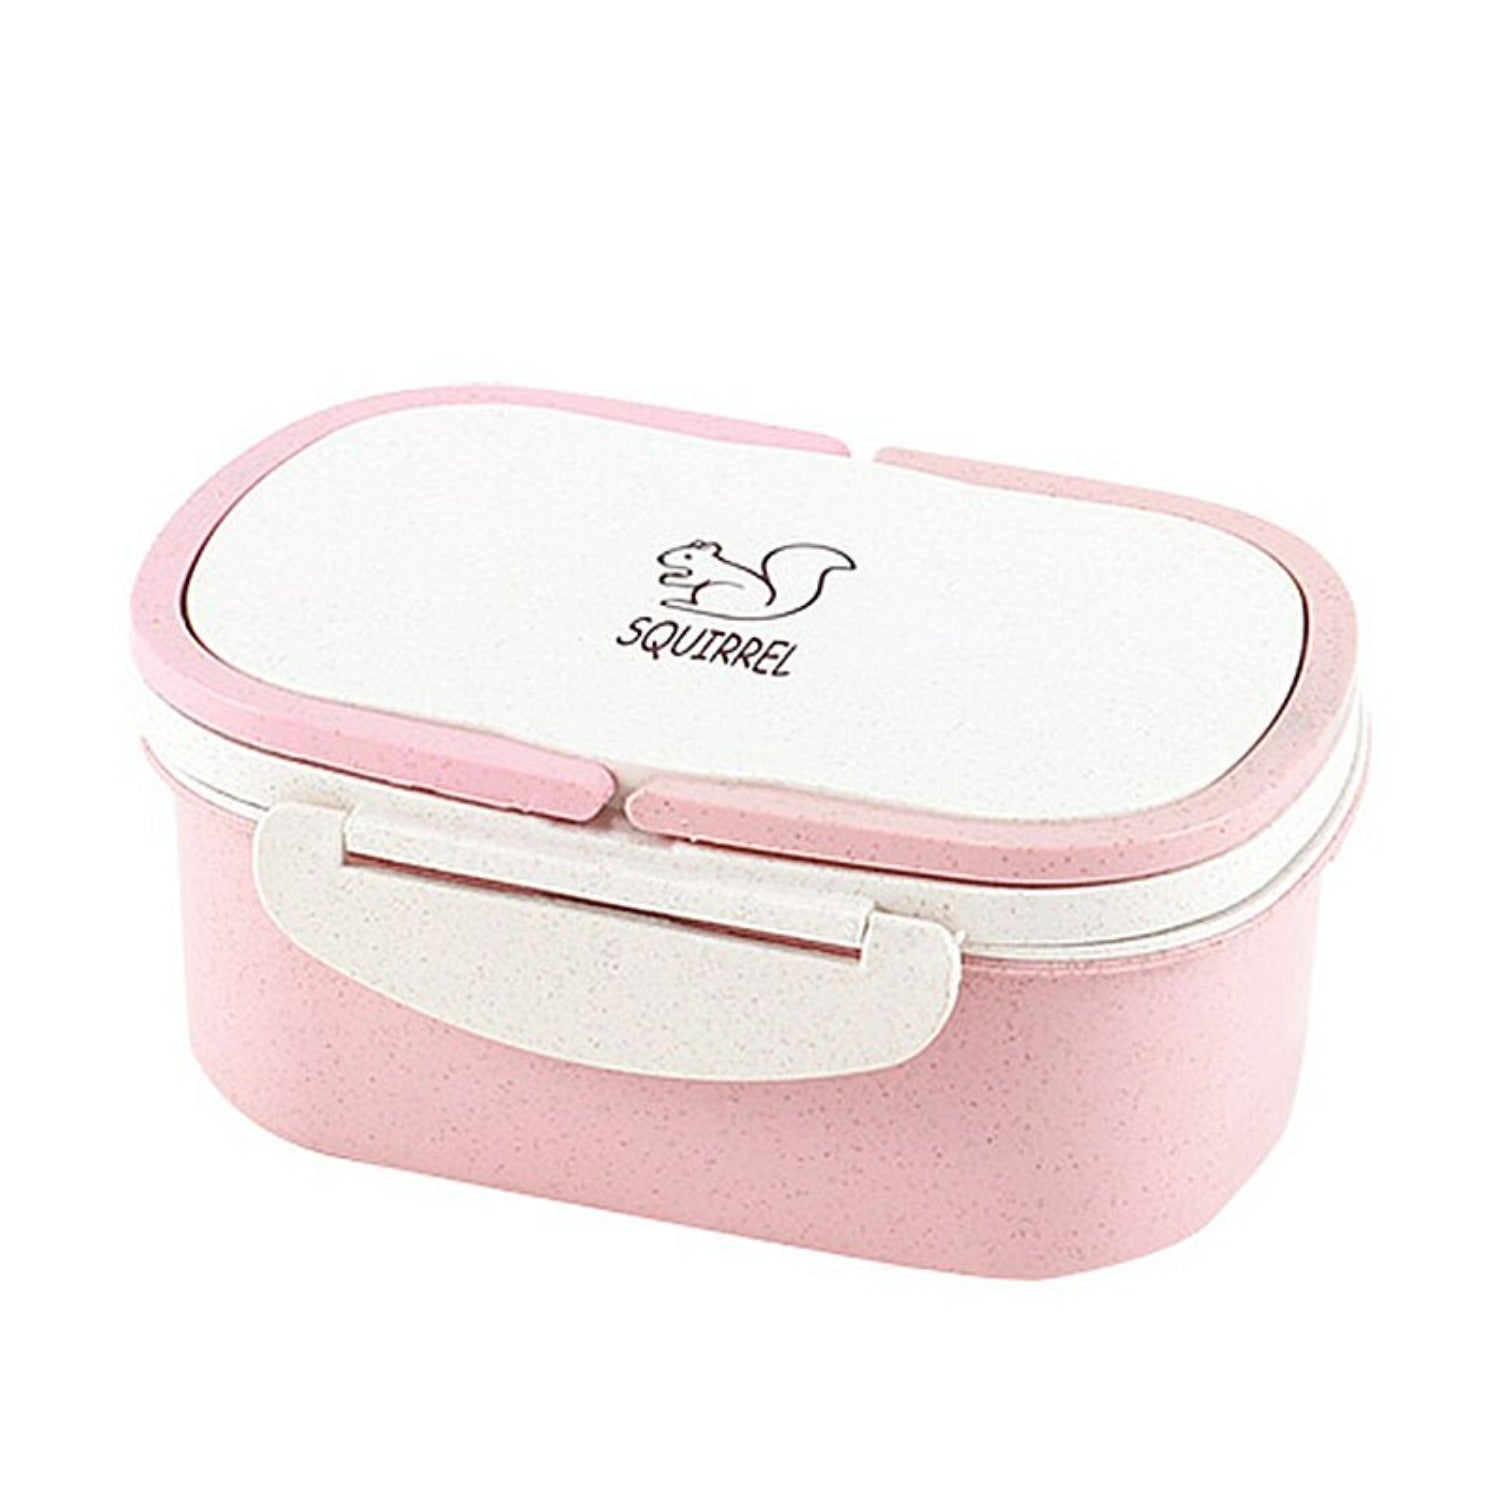 https://allabundantthings.com/cdn/shop/files/D8bWWith-Compartments-Lunchbox-Heated-Food-Container-For-Food-Bento-Box-Japanese-Thermal-Snack-Electric-Heated-Lunch.jpg?v=1684908741&width=1920